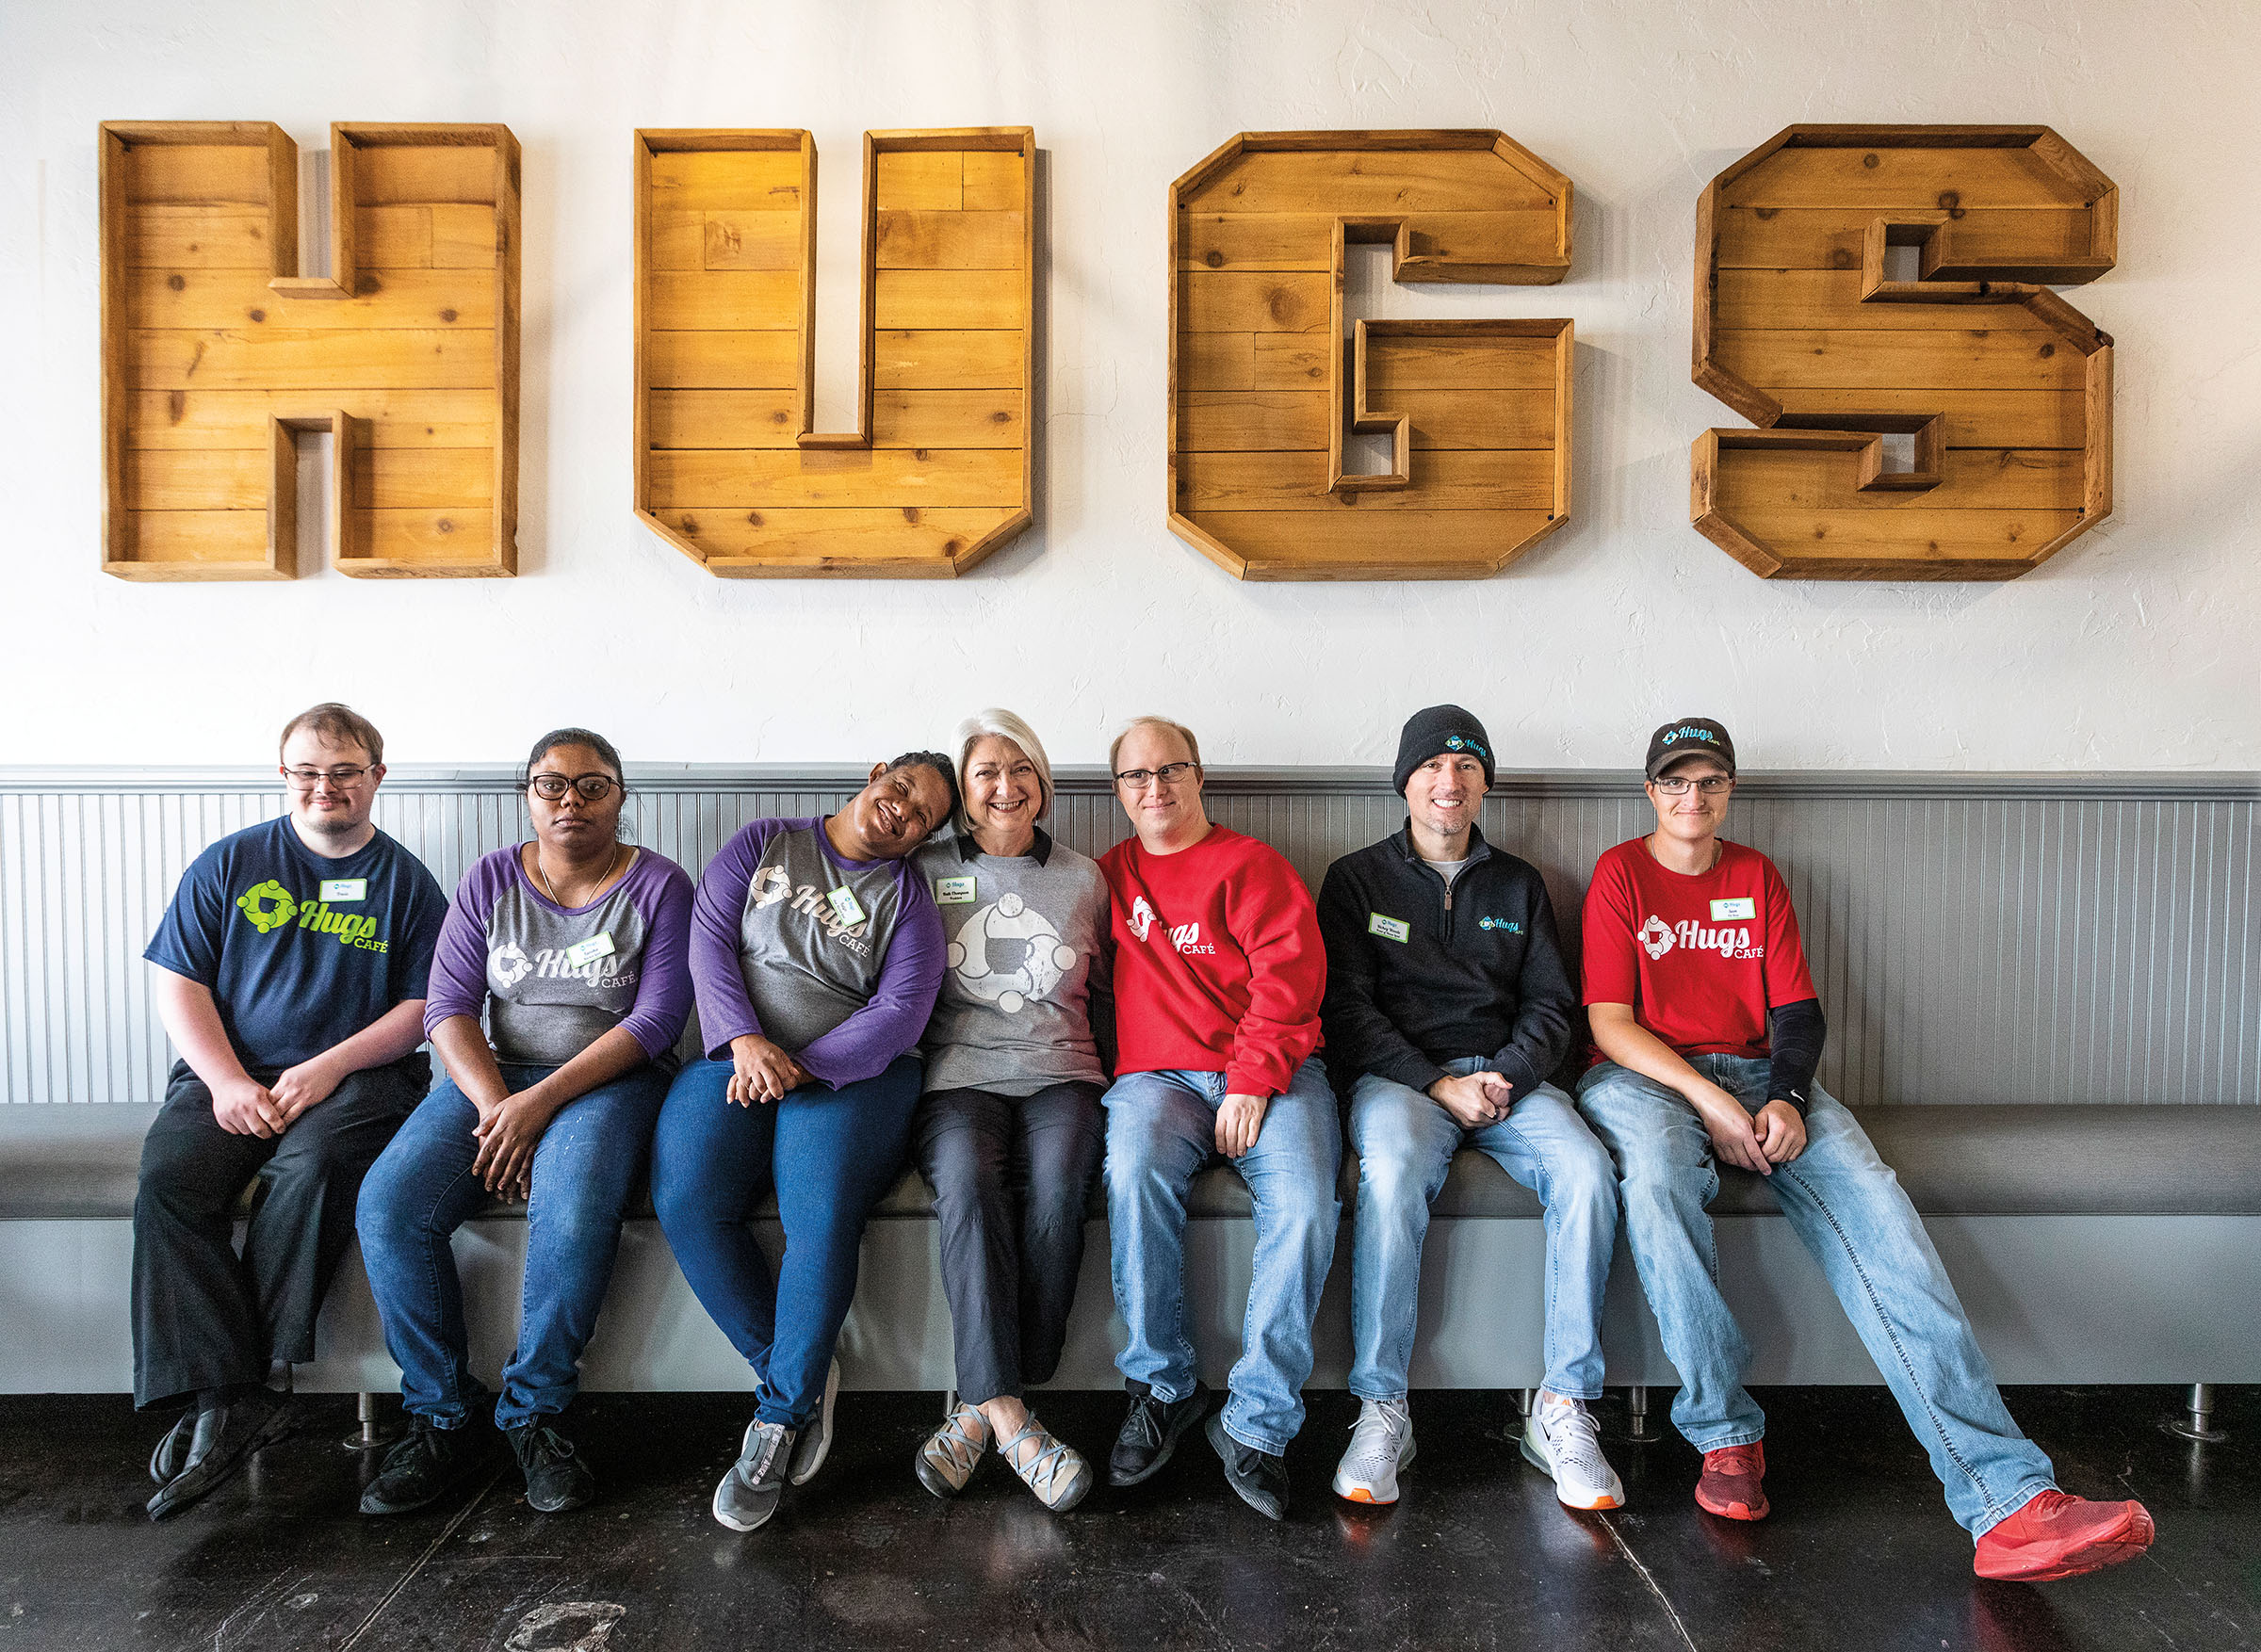 A group of people in t-shirts and jeans sit in front of a large wooden sign reading "HUGS"